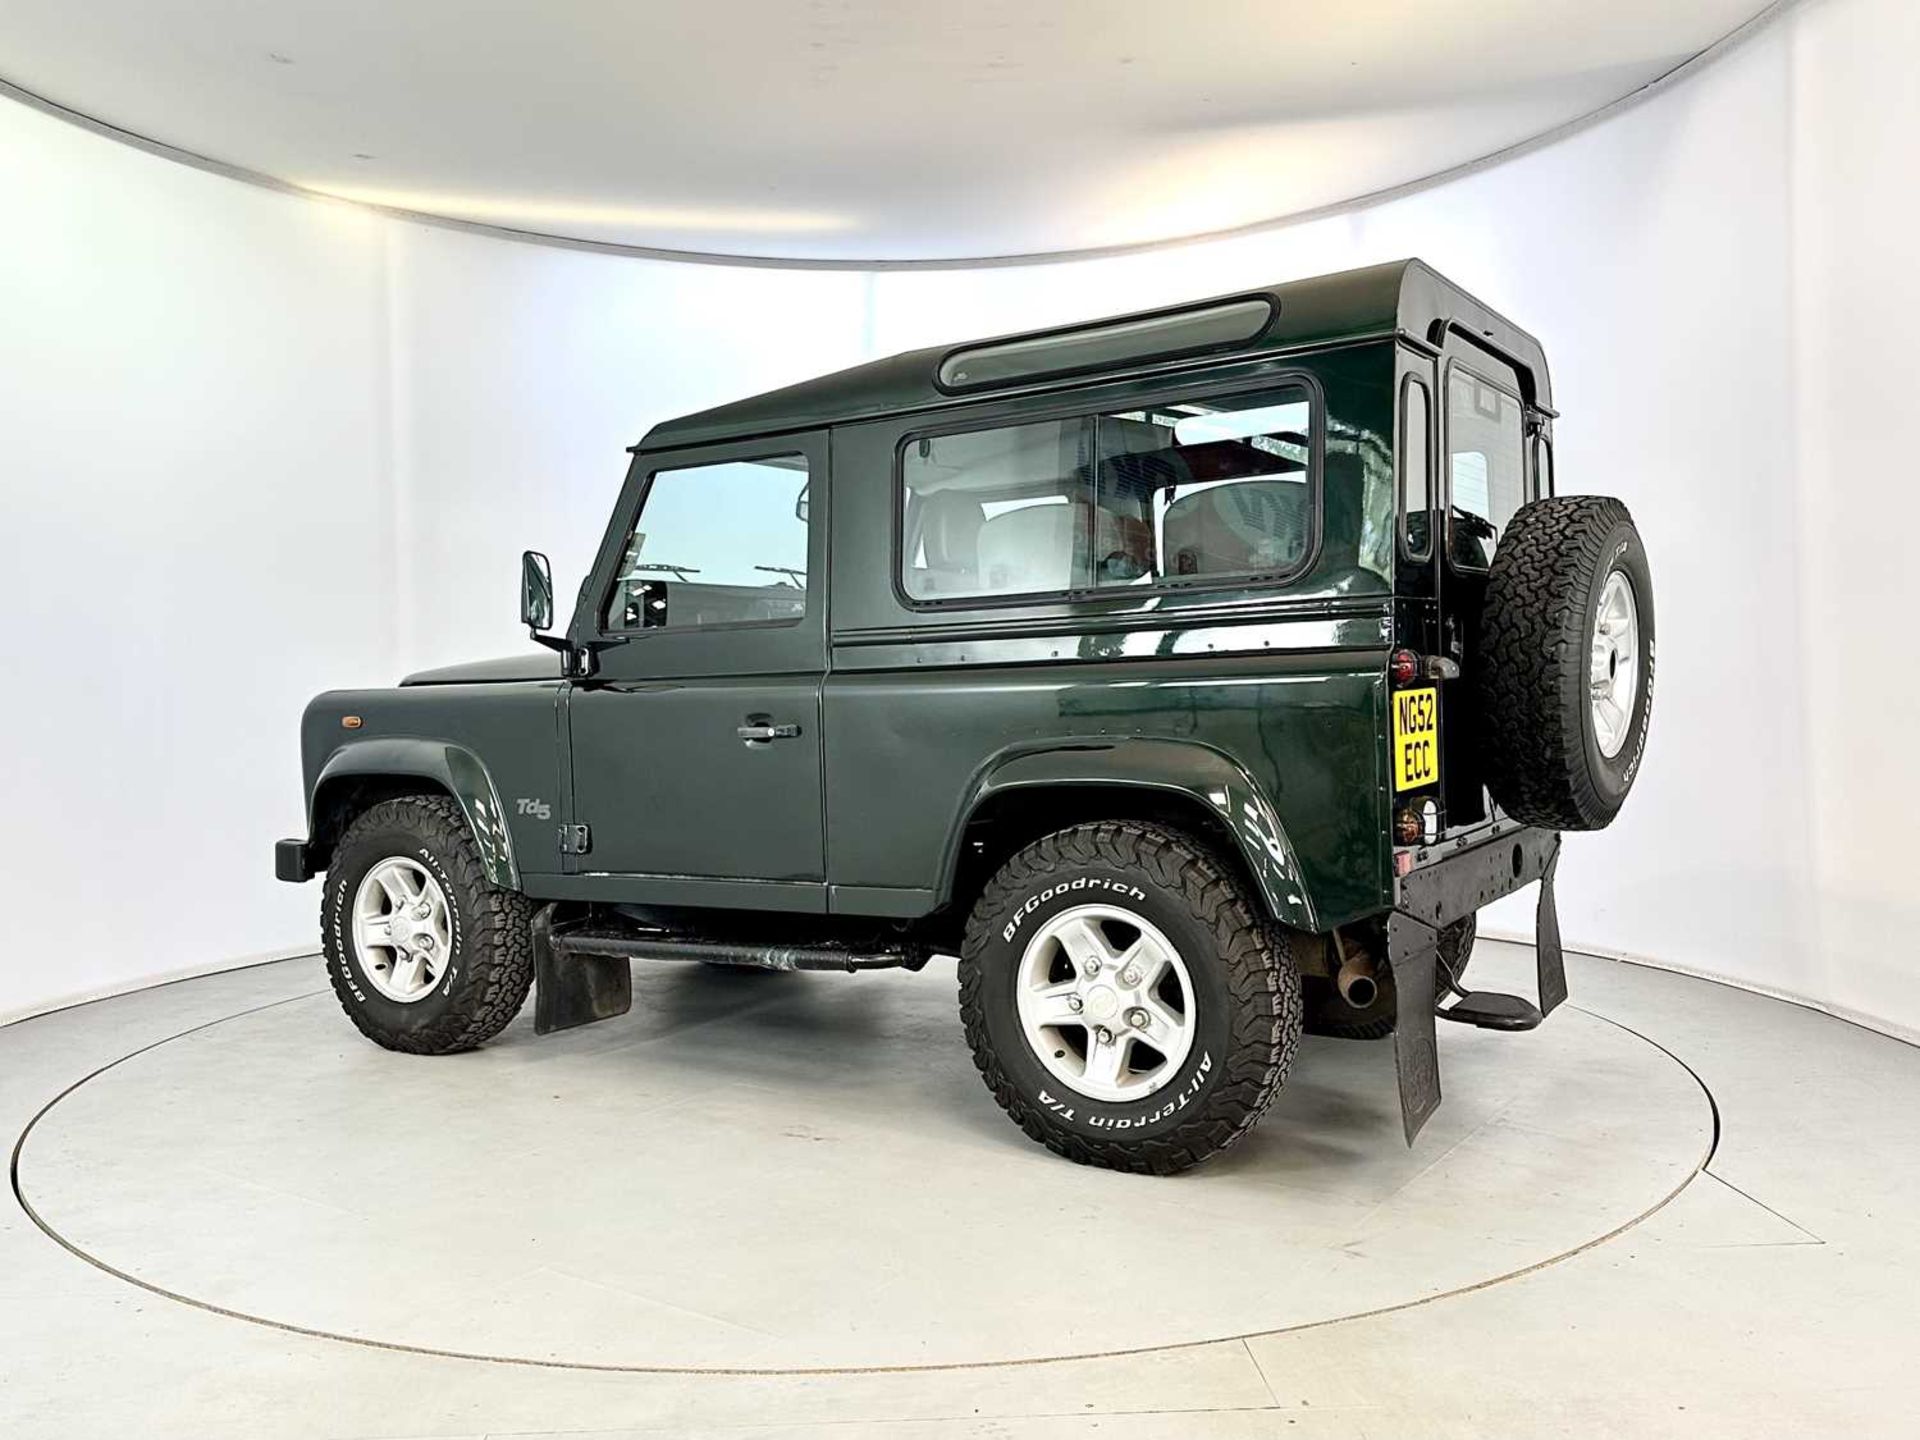 2002 Land Rover Defender 90 TD5 County - Image 6 of 28